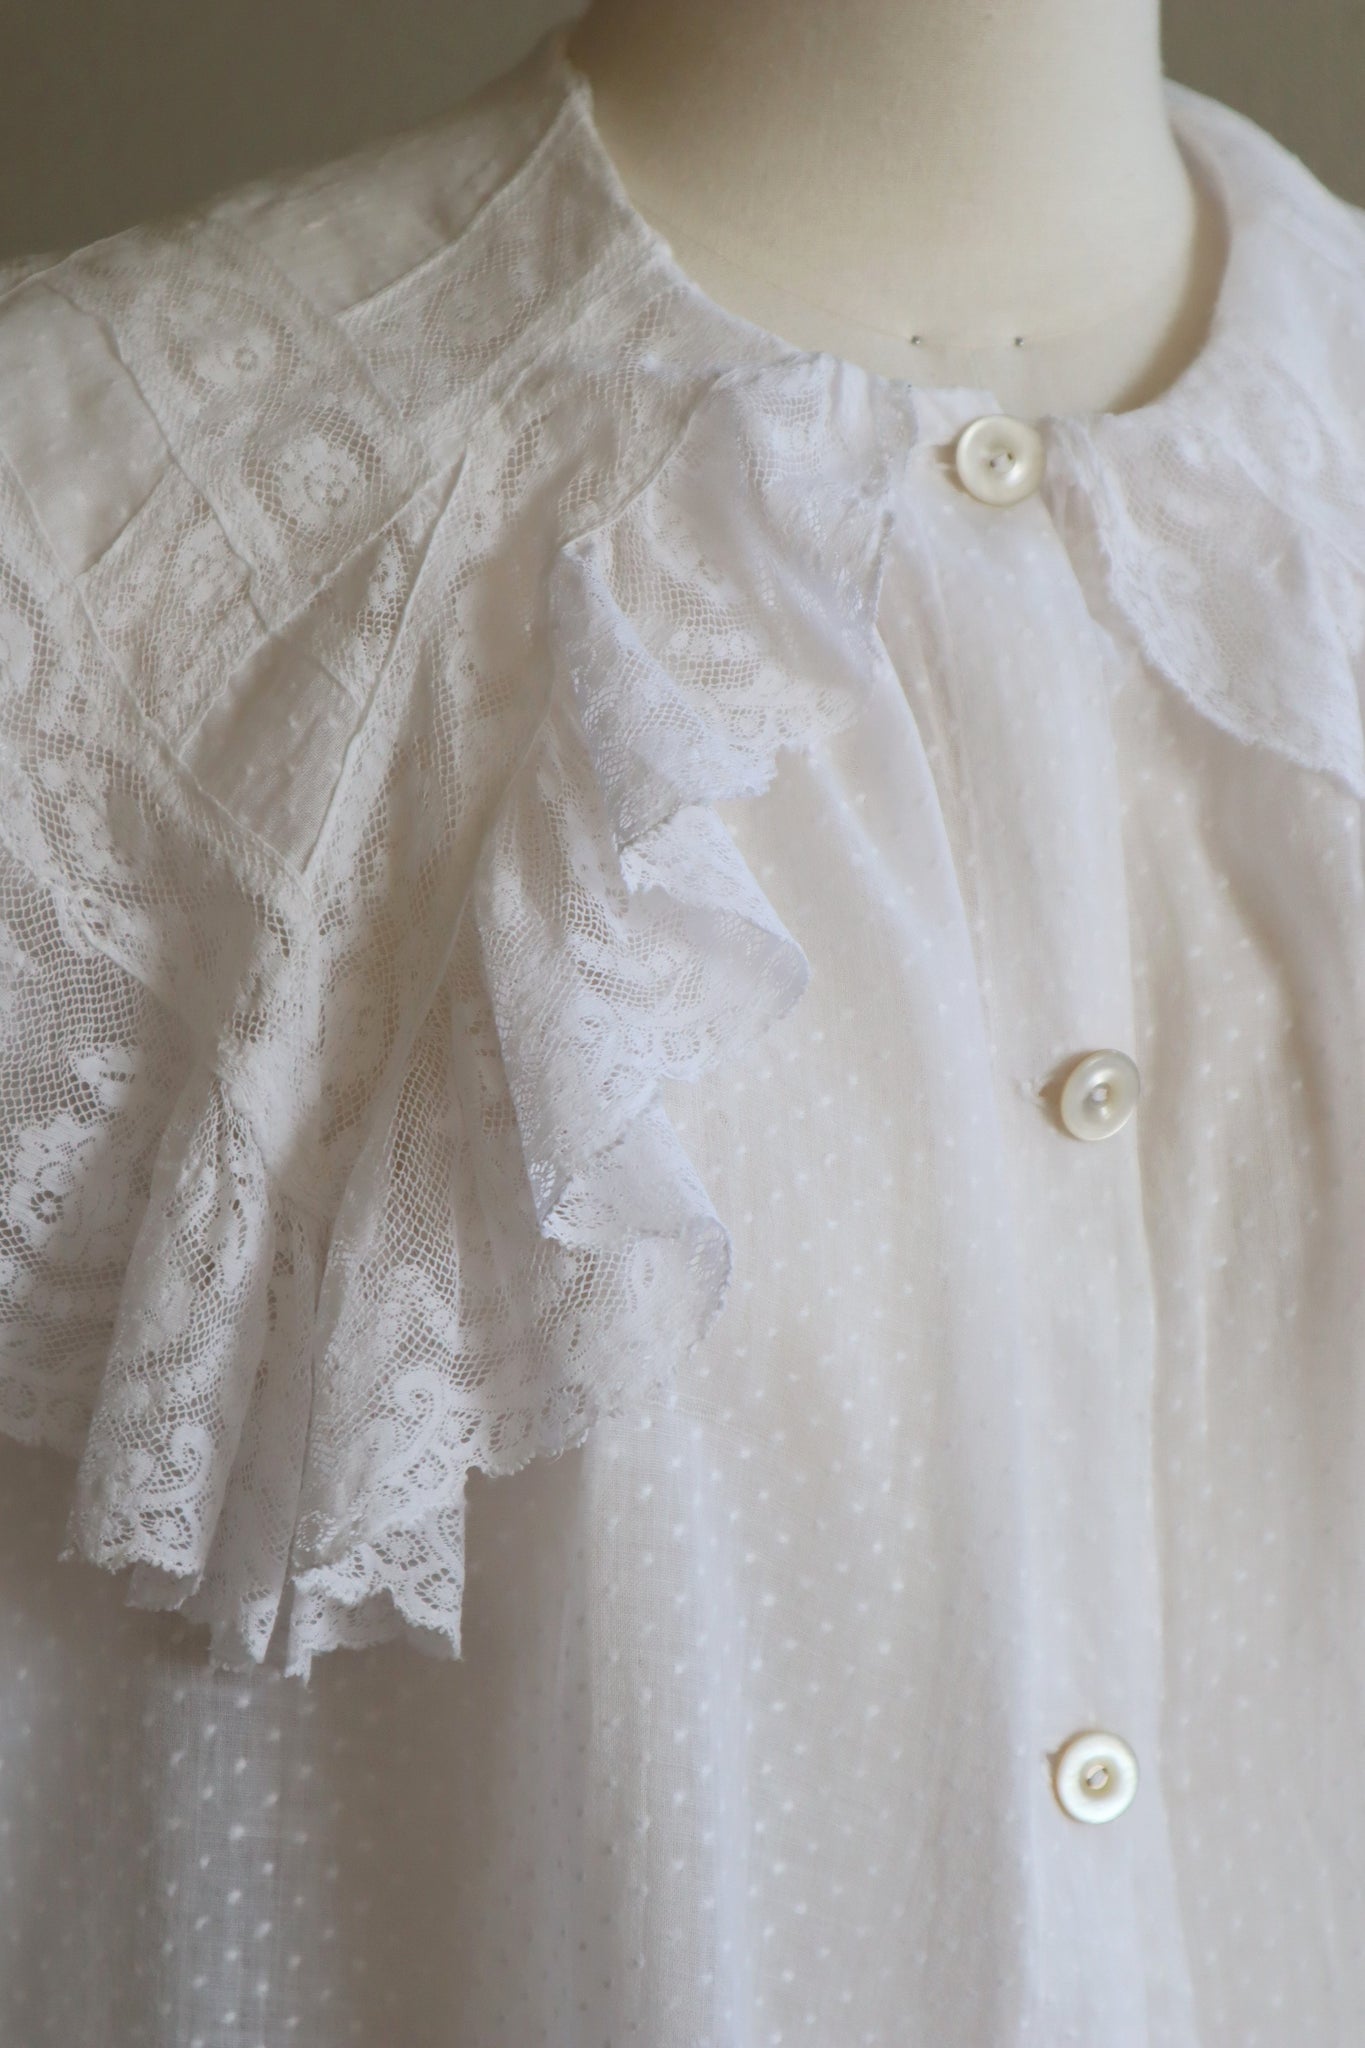 1880s Lovely Belle Epoque Era Frilled Lace Blouse